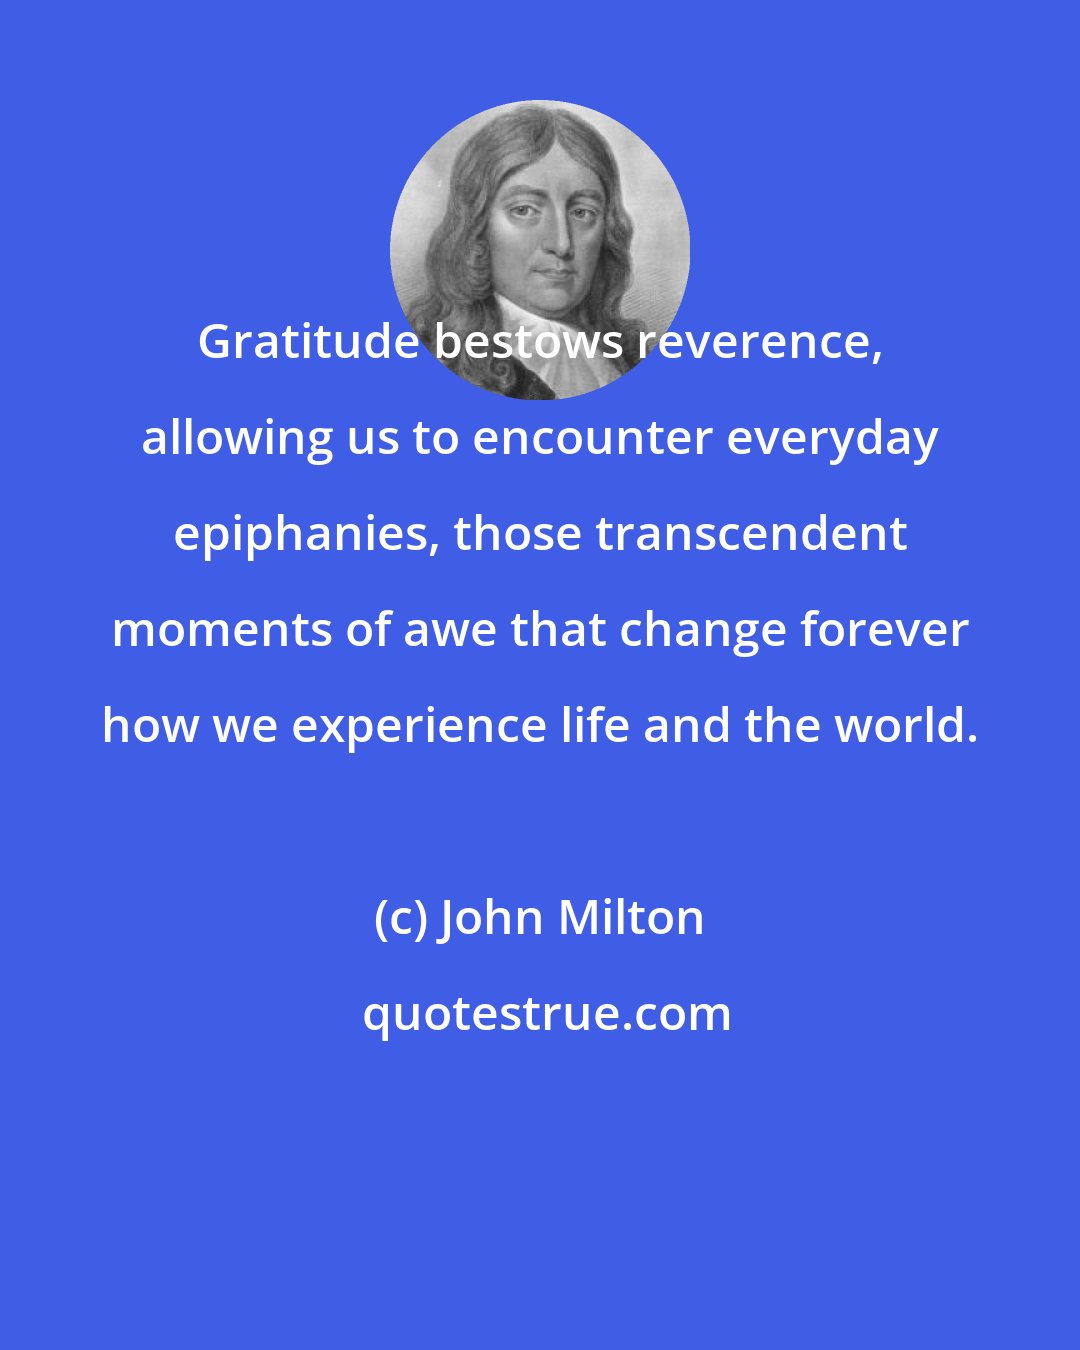 John Milton: Gratitude bestows reverence, allowing us to encounter everyday epiphanies, those transcendent moments of awe that change forever how we experience life and the world.